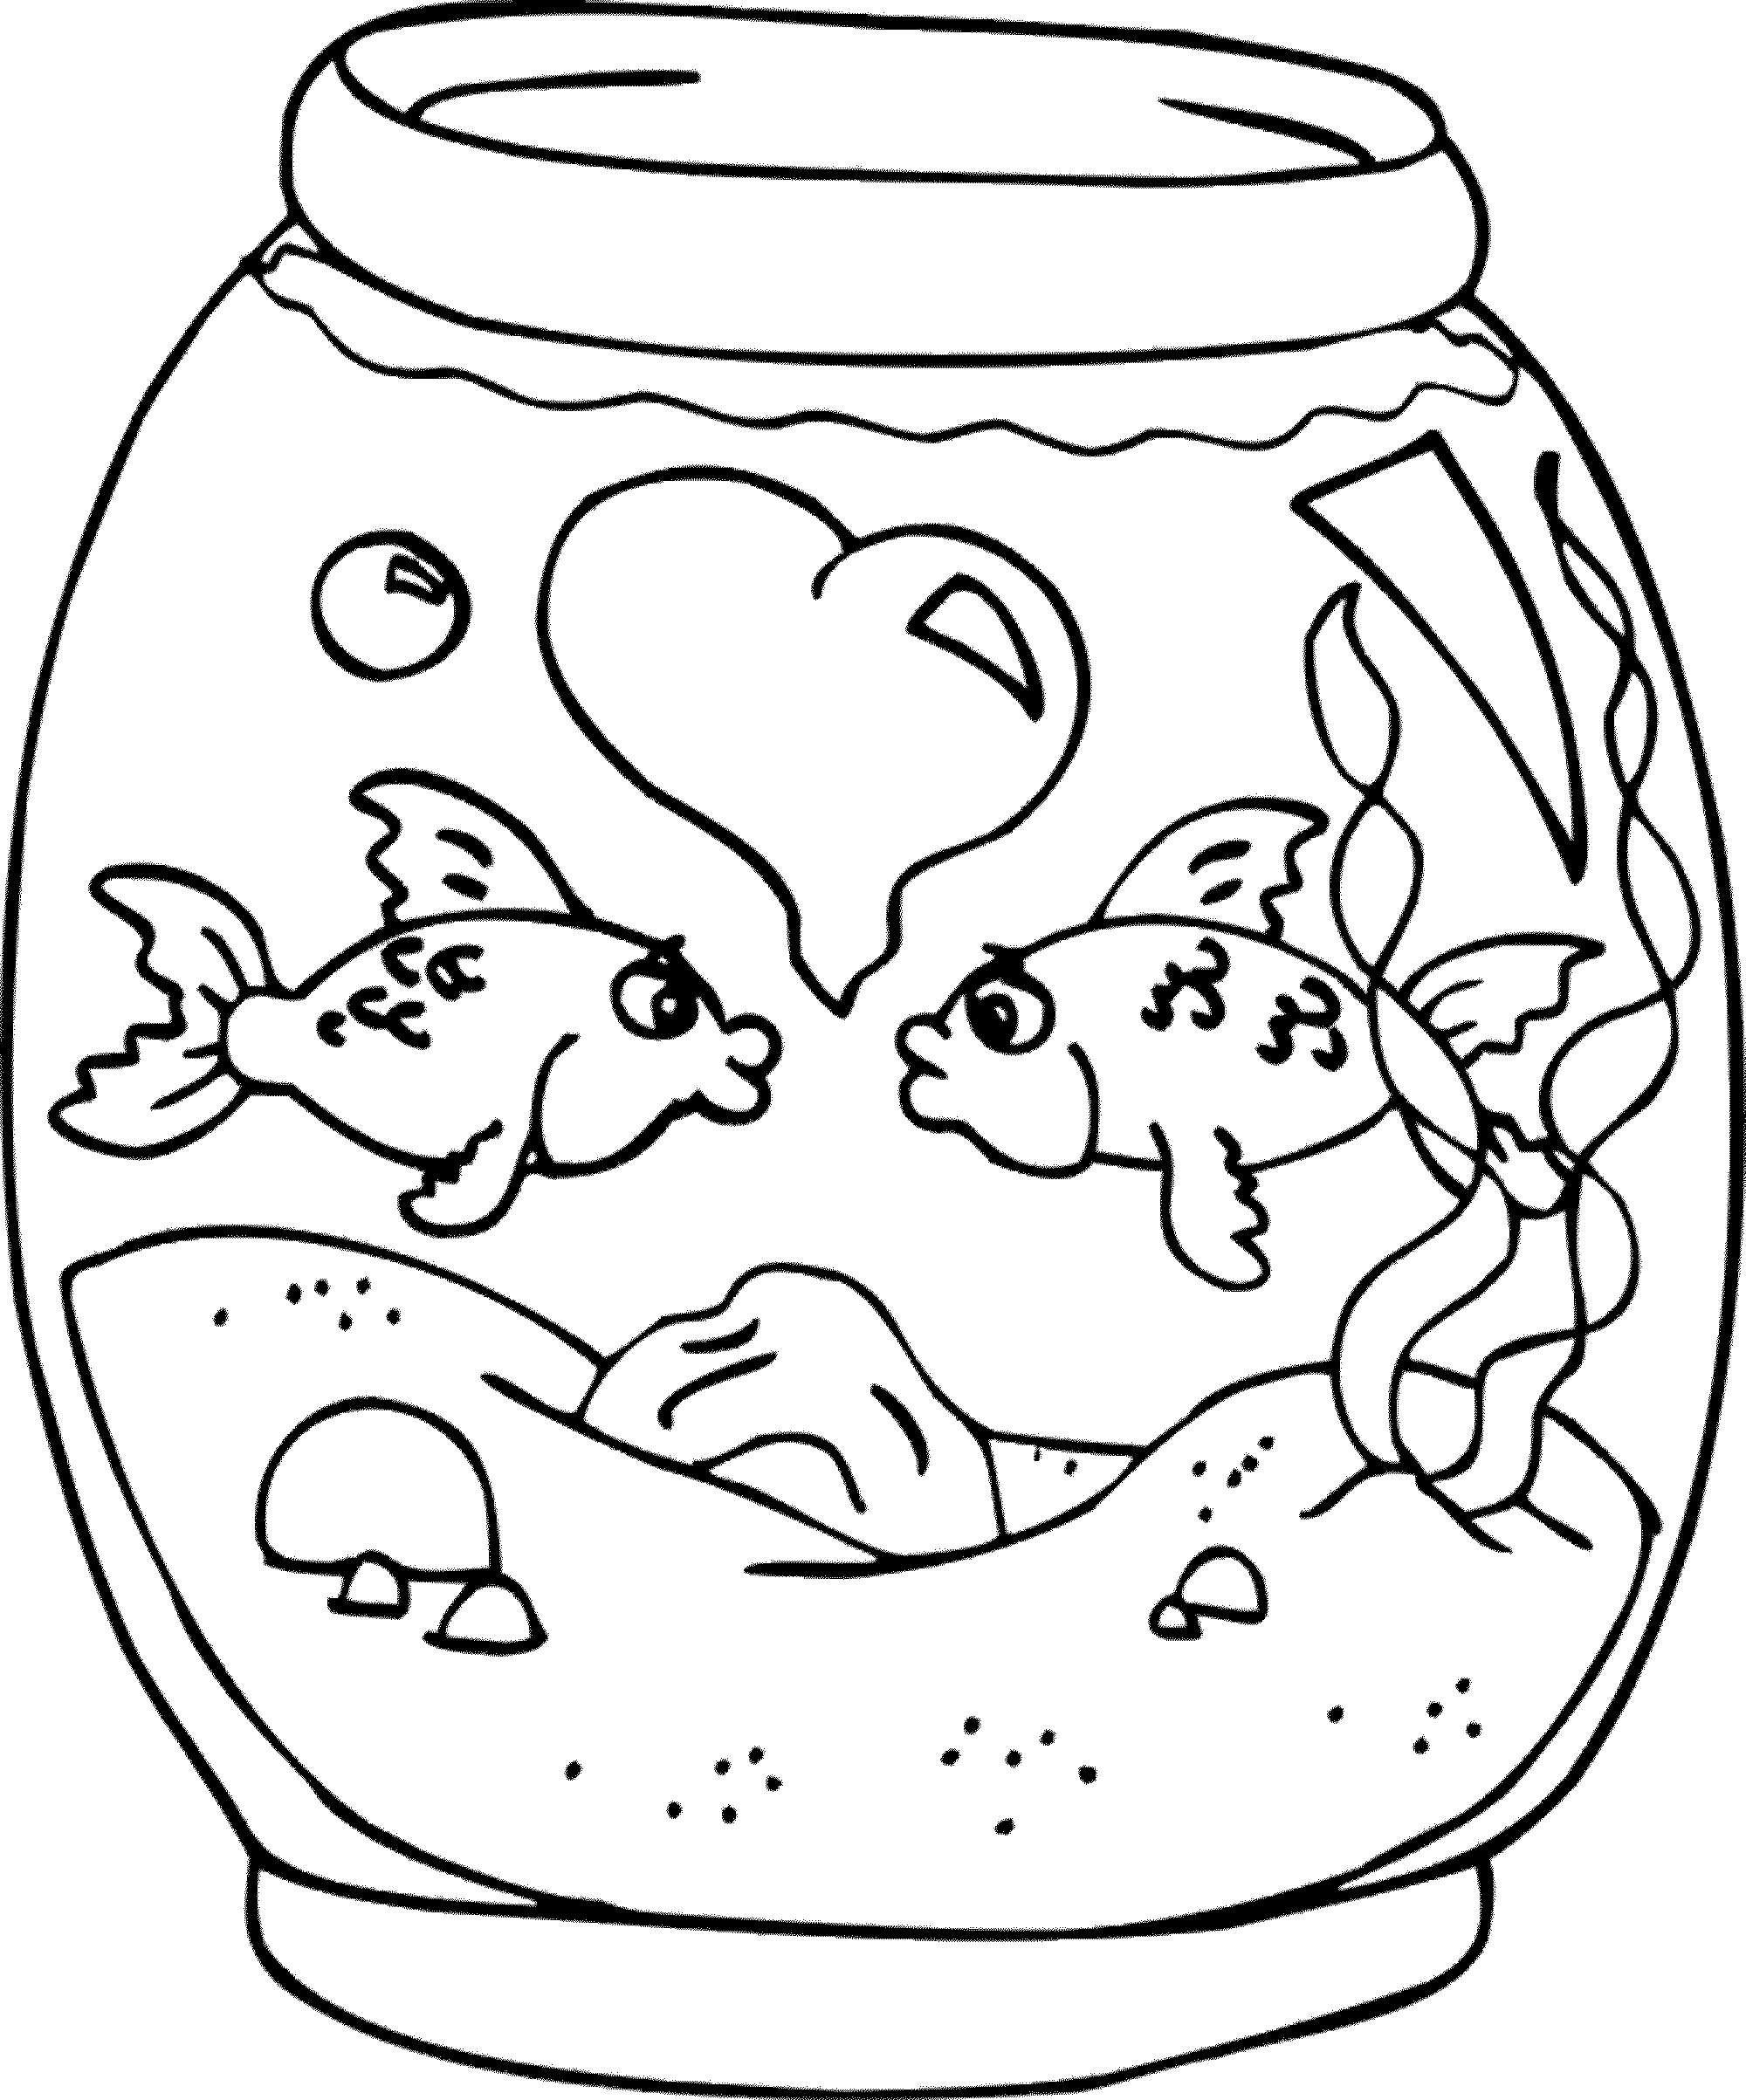 fish tank coloring pages